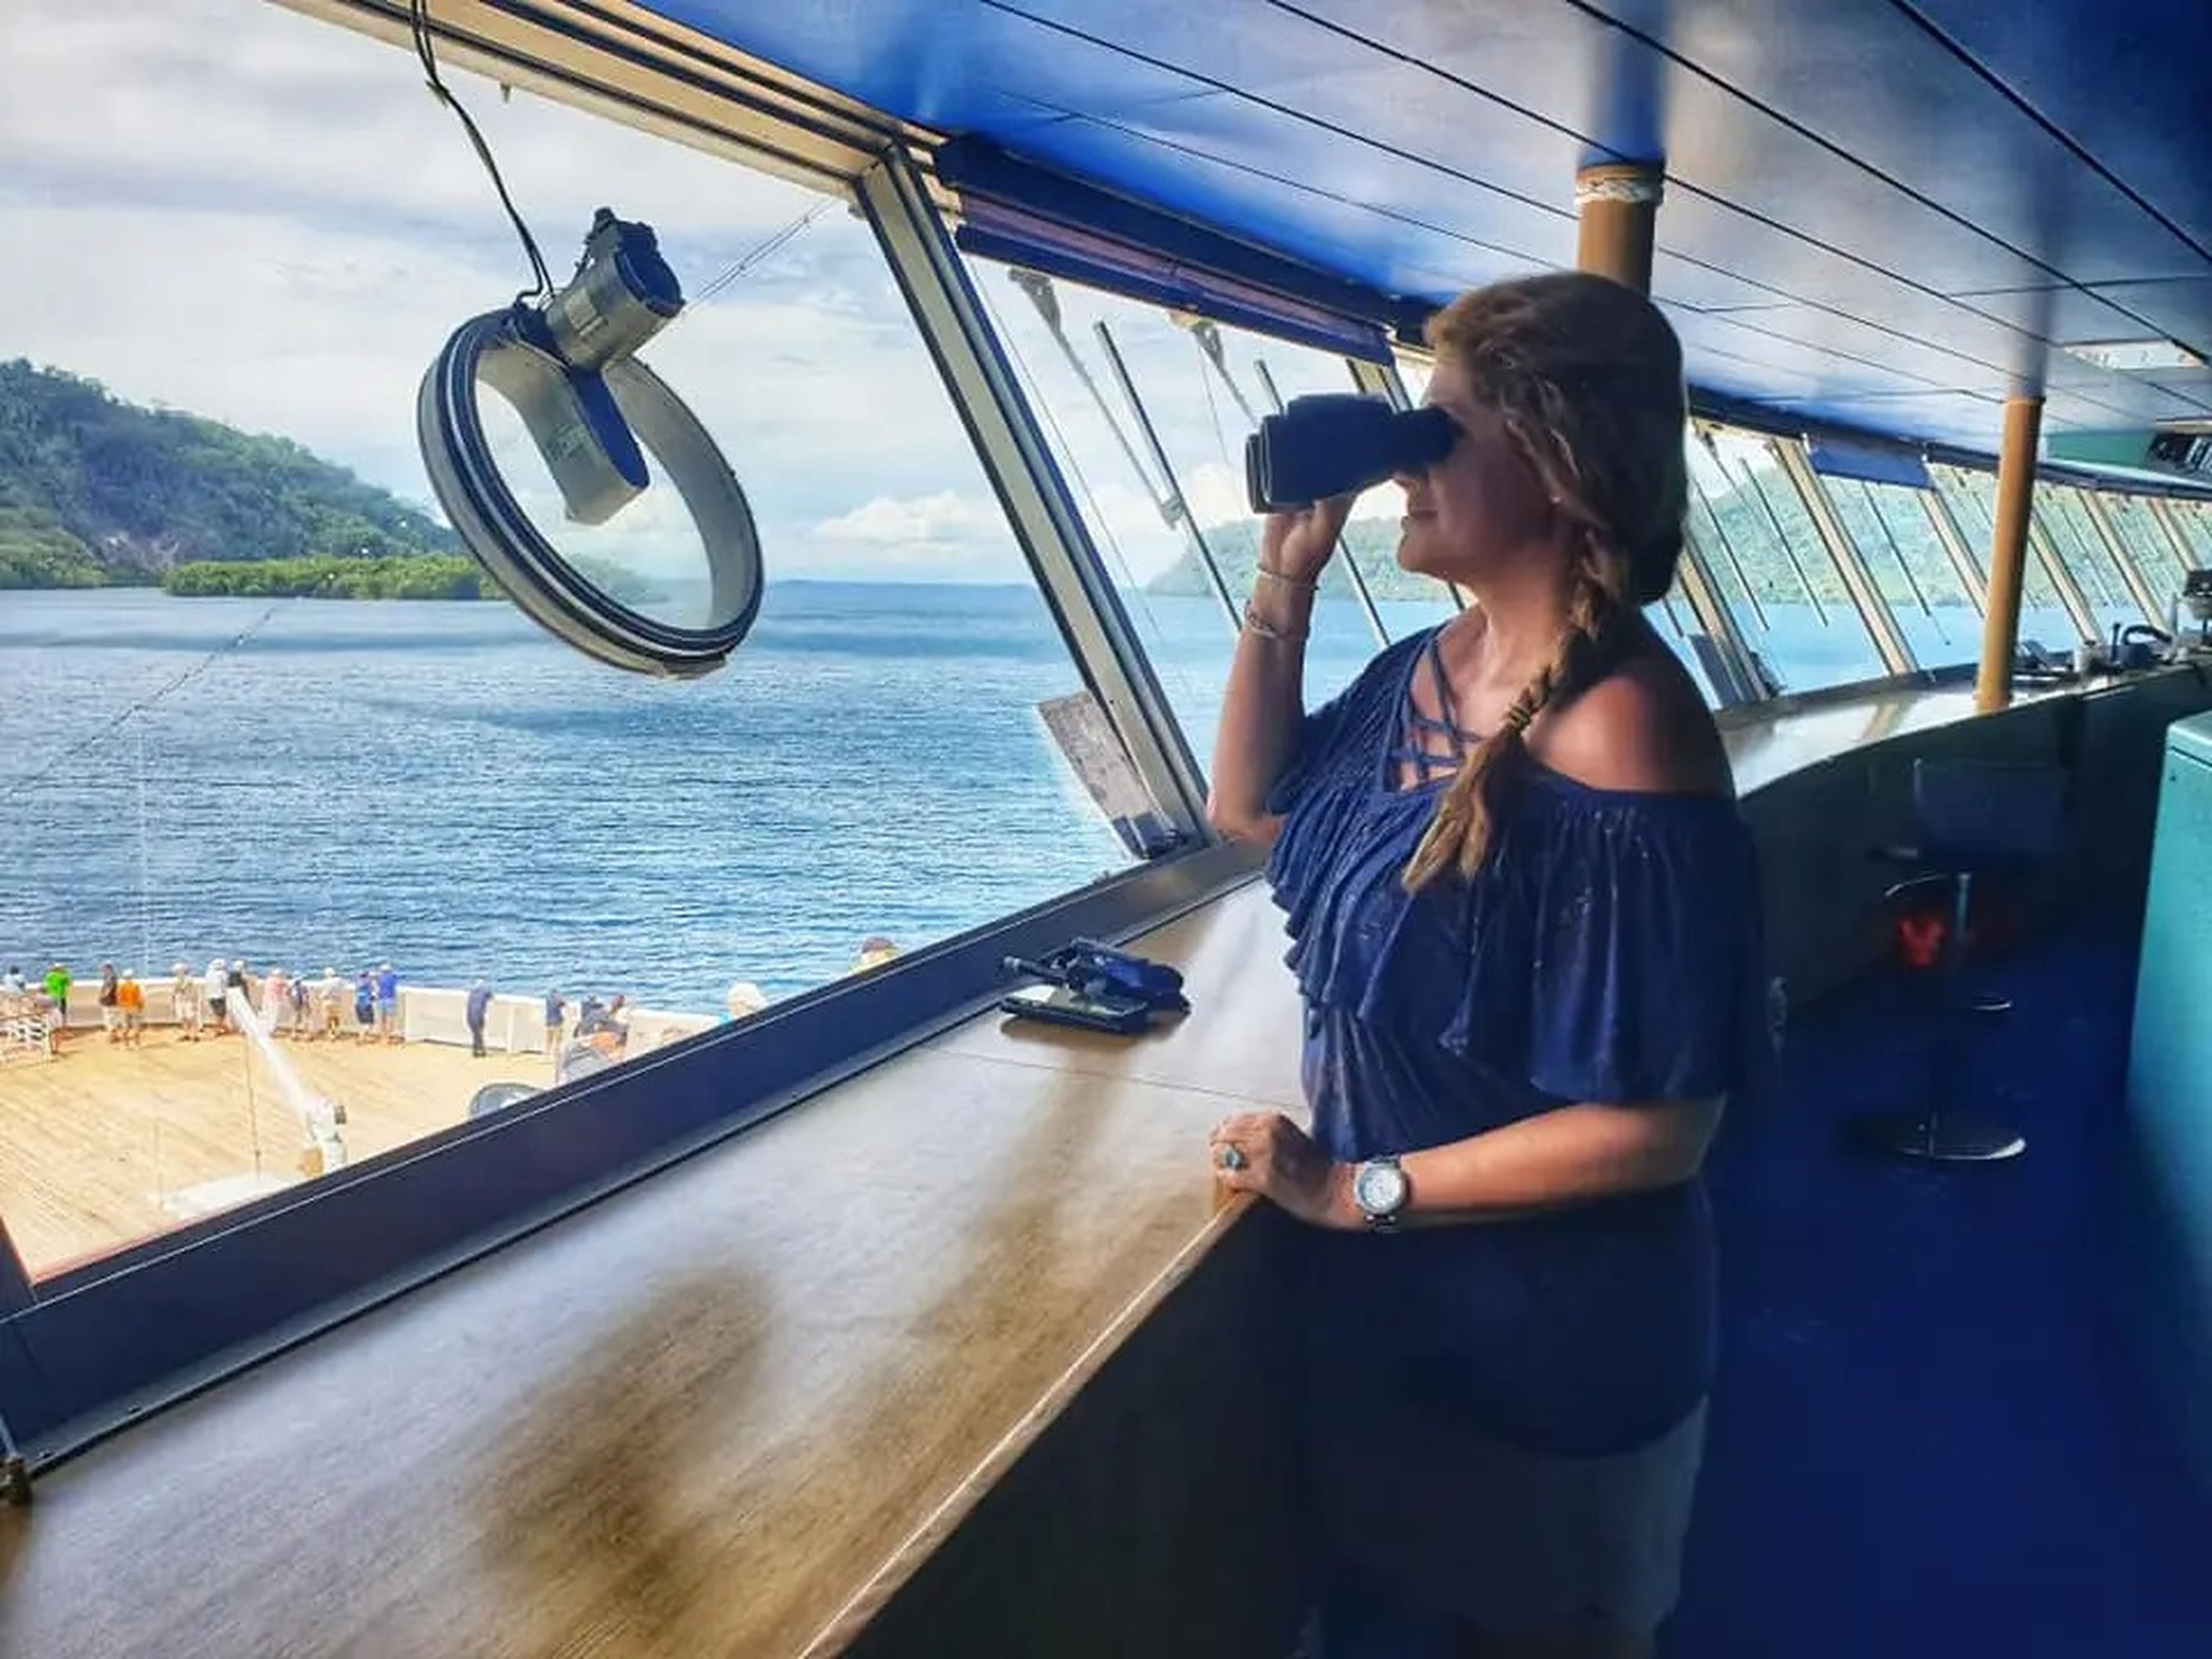 the writer with binoculars looking at a cruise